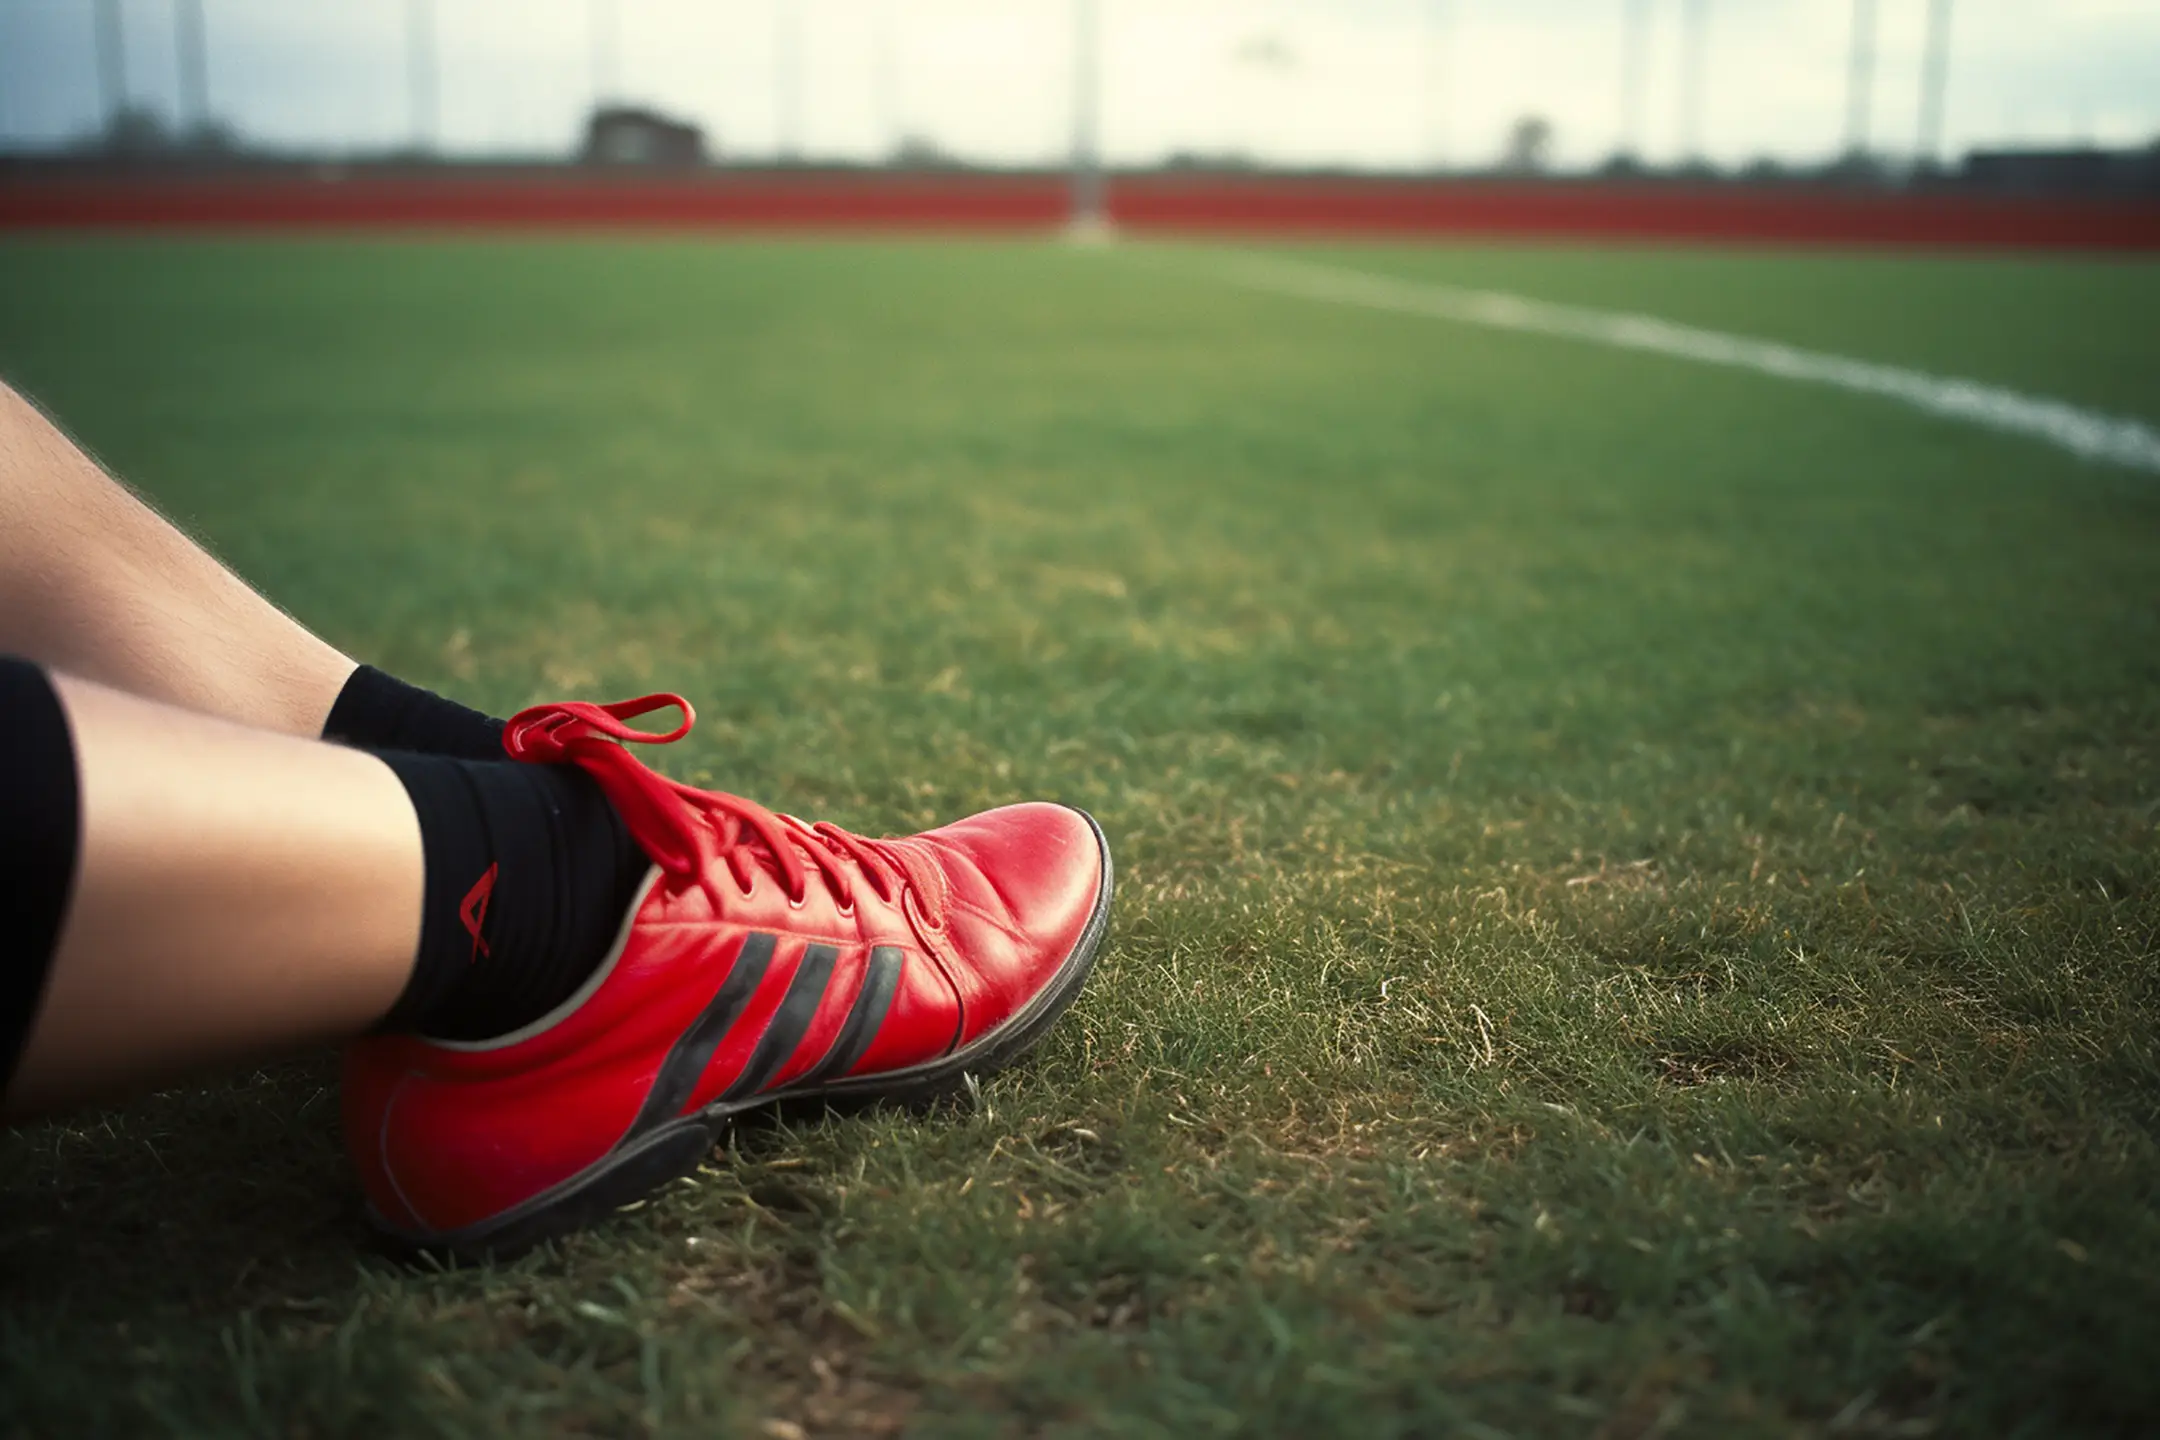 Photograph Close Up Persons Lying Relaxed On Soccer Pitch With Red Boots On